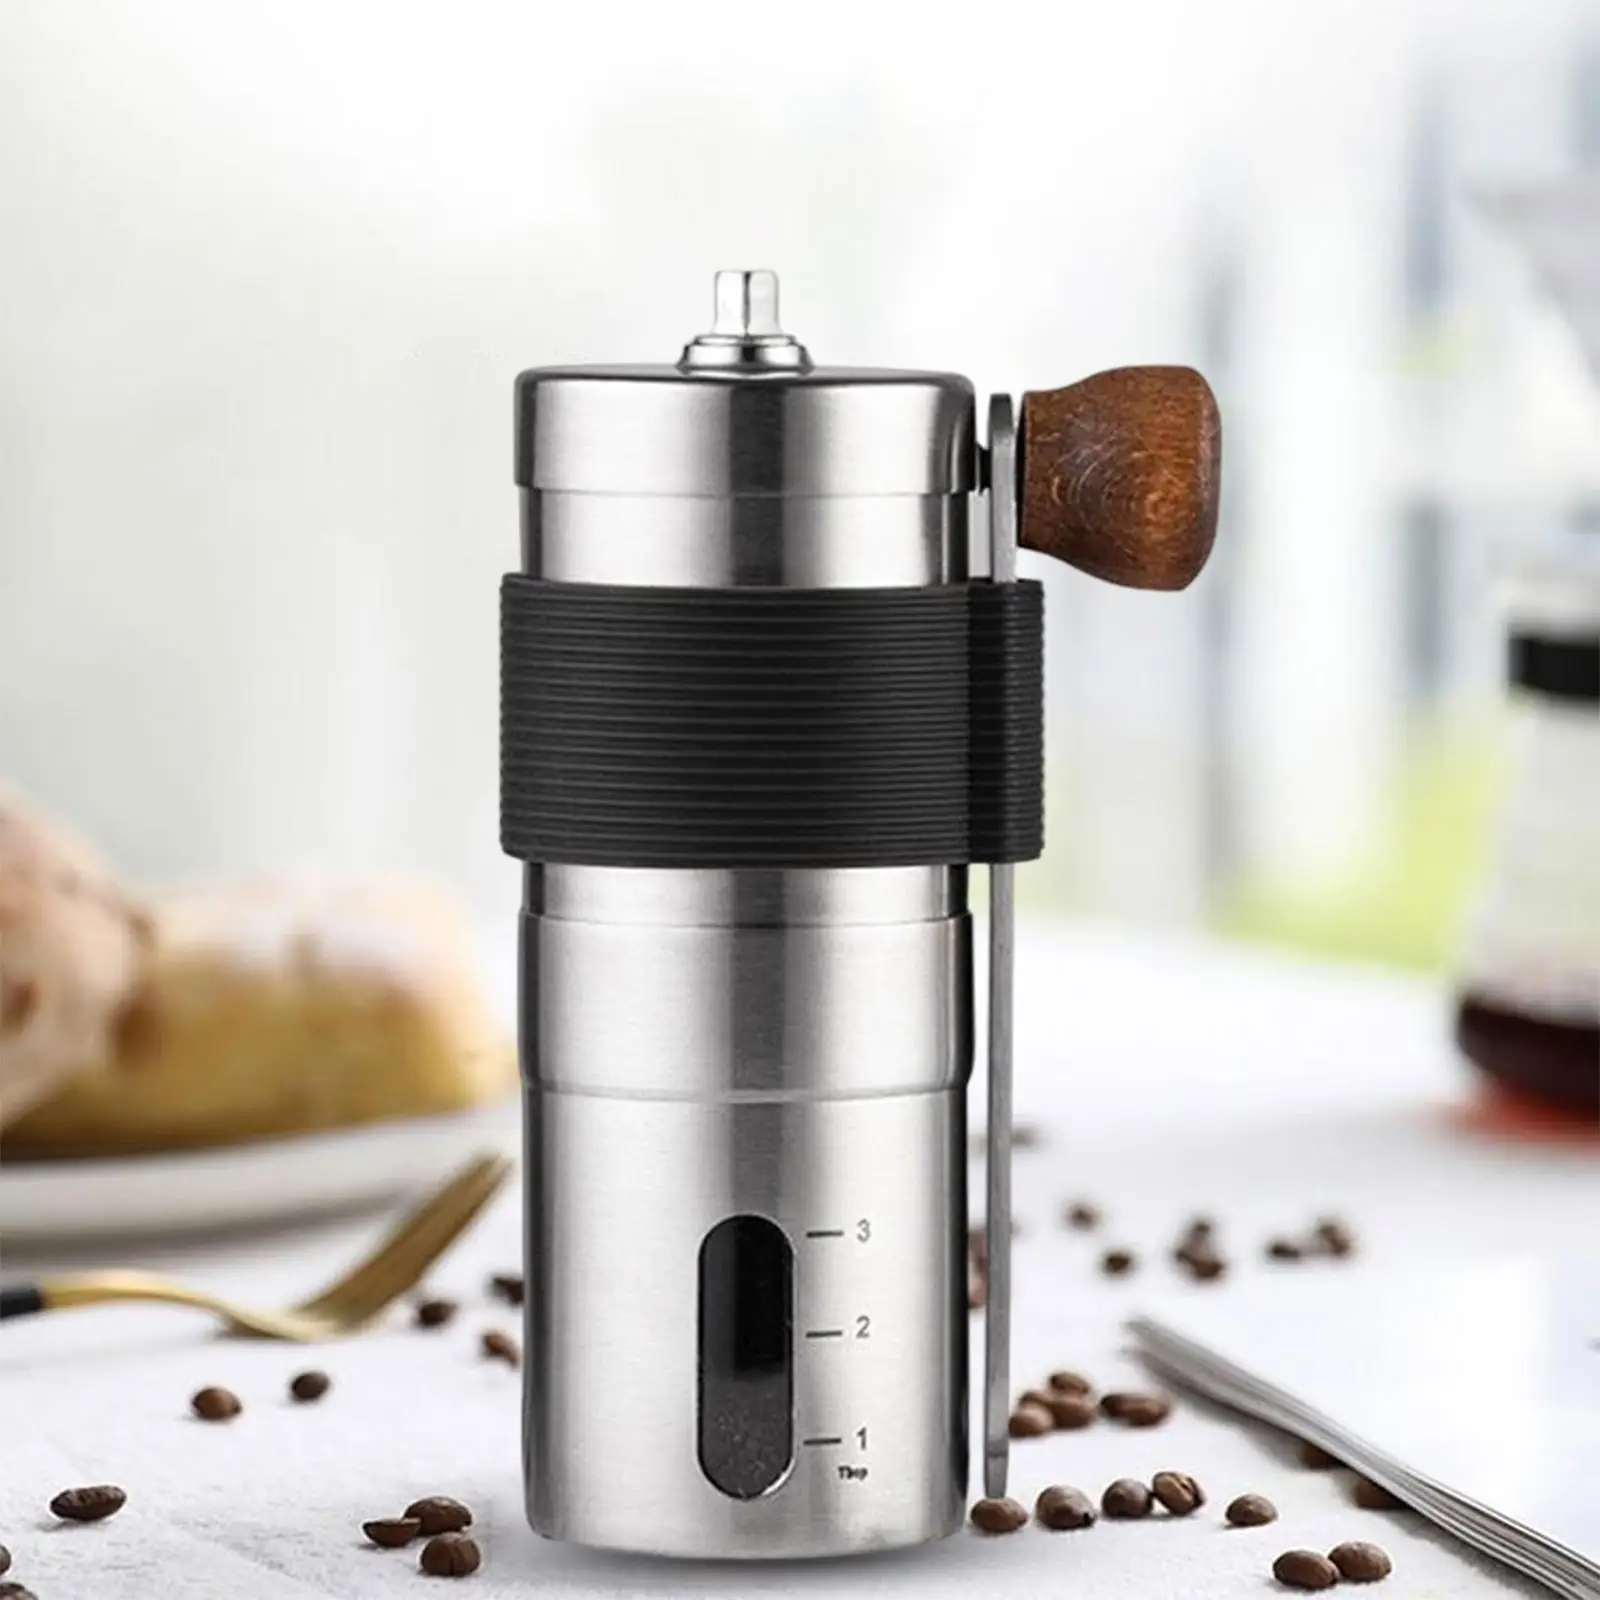 Stainless Steel Manual Coffee Bean Grinder Spice/Nut Grinding Mill Hand Tool